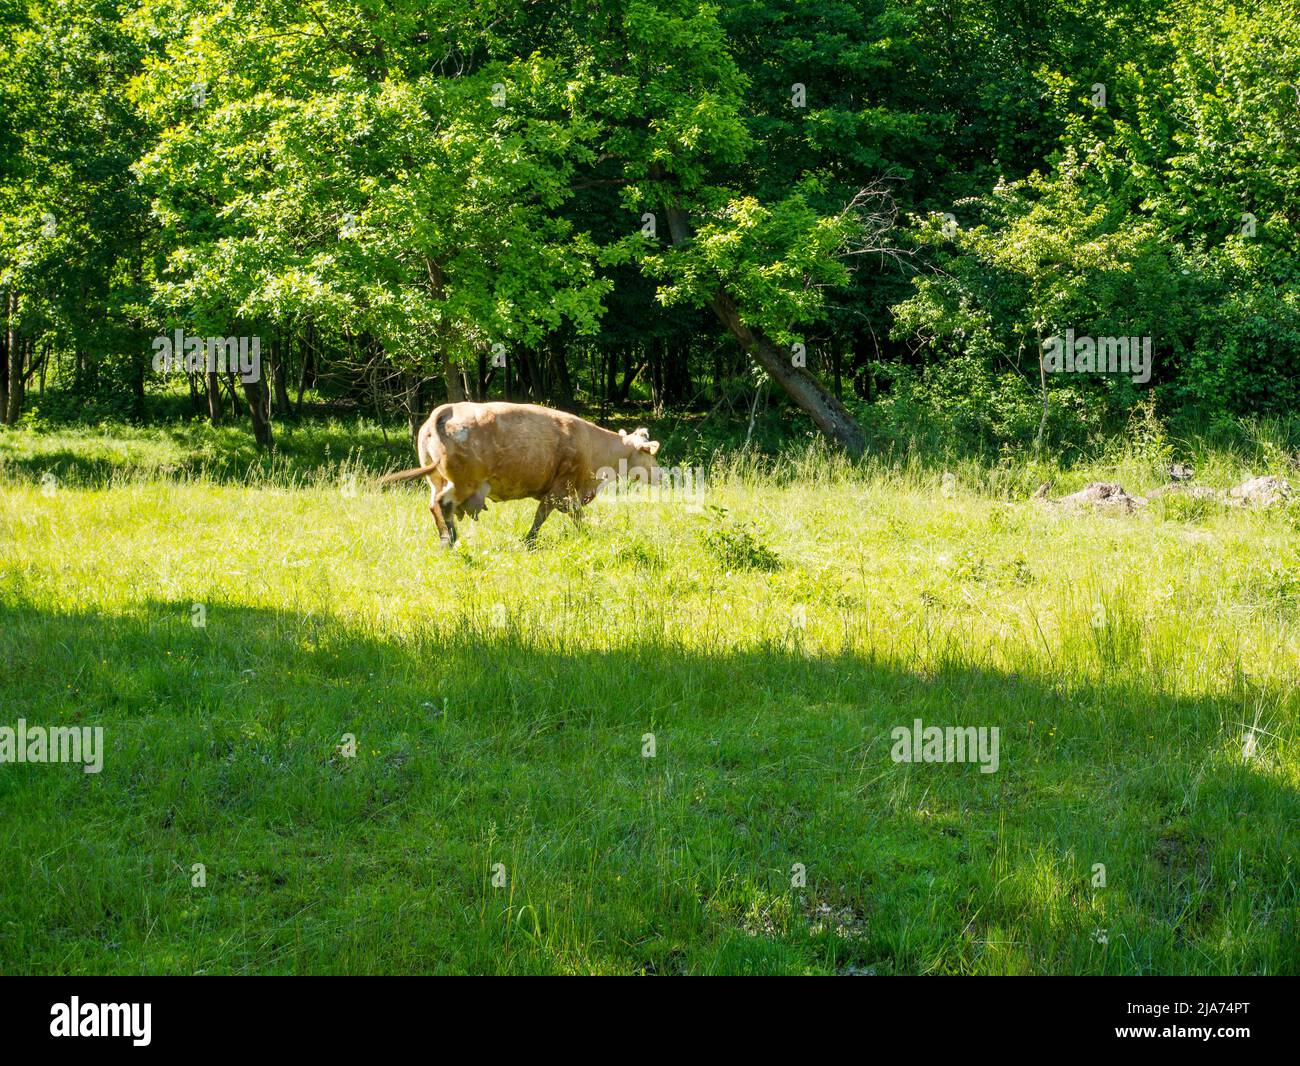 Flock of cows on a meadow. Brown and white cows. Green meadow. Stock Photo